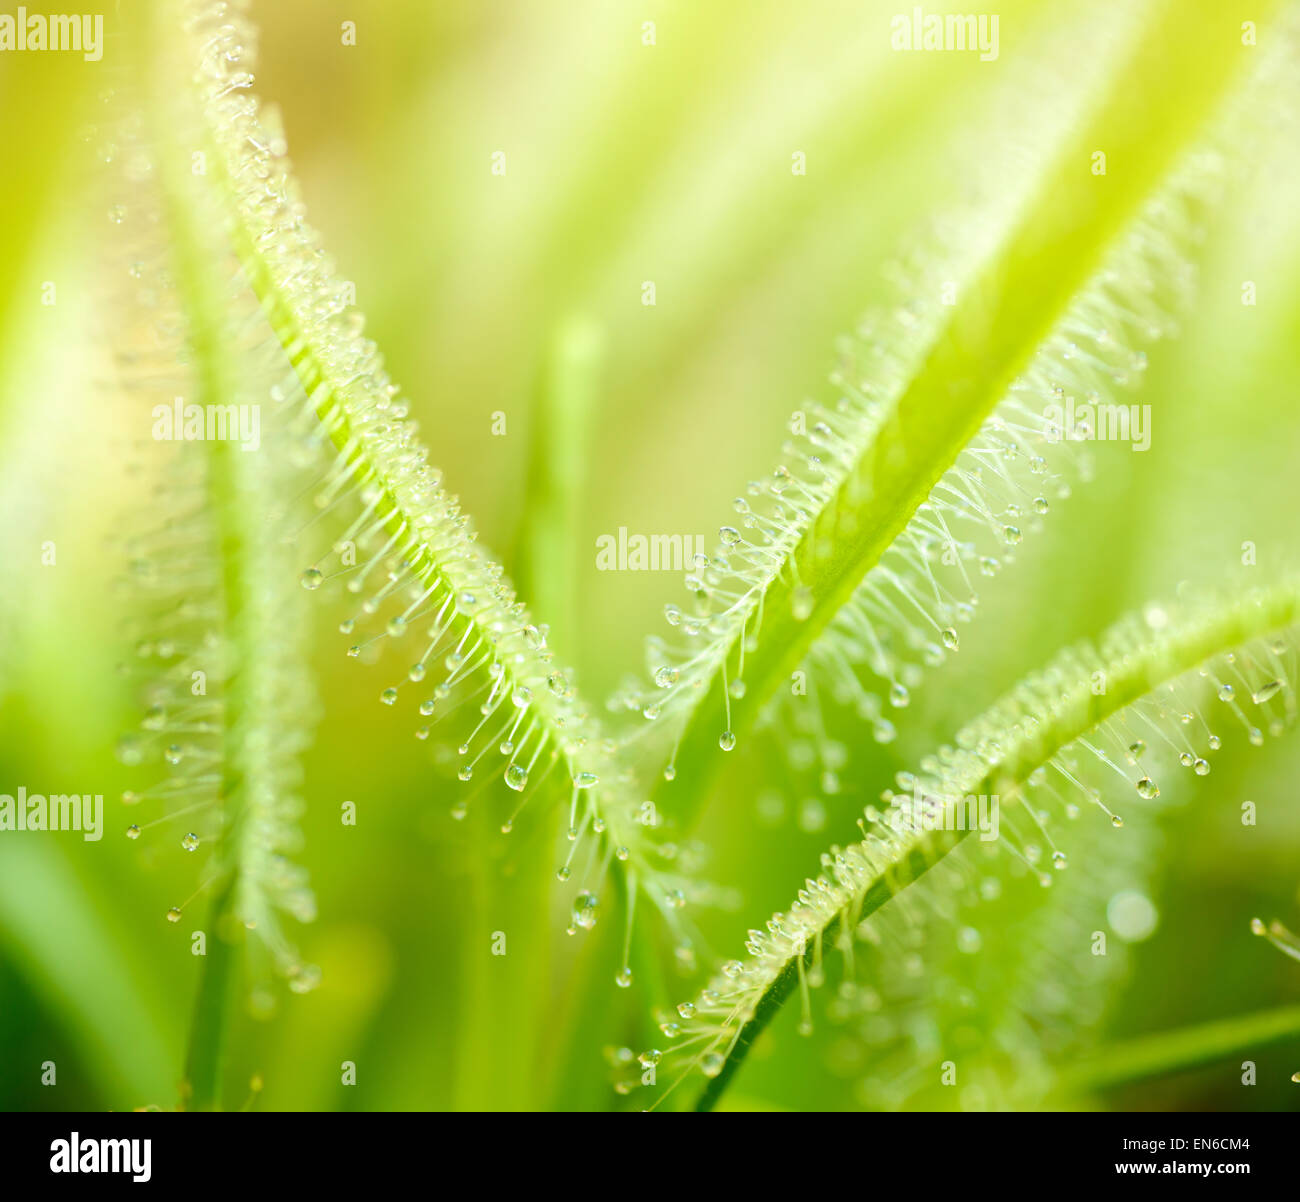 Plants and trees: green leaves of sundews, sunlight from above, abstract natural background Stock Photo